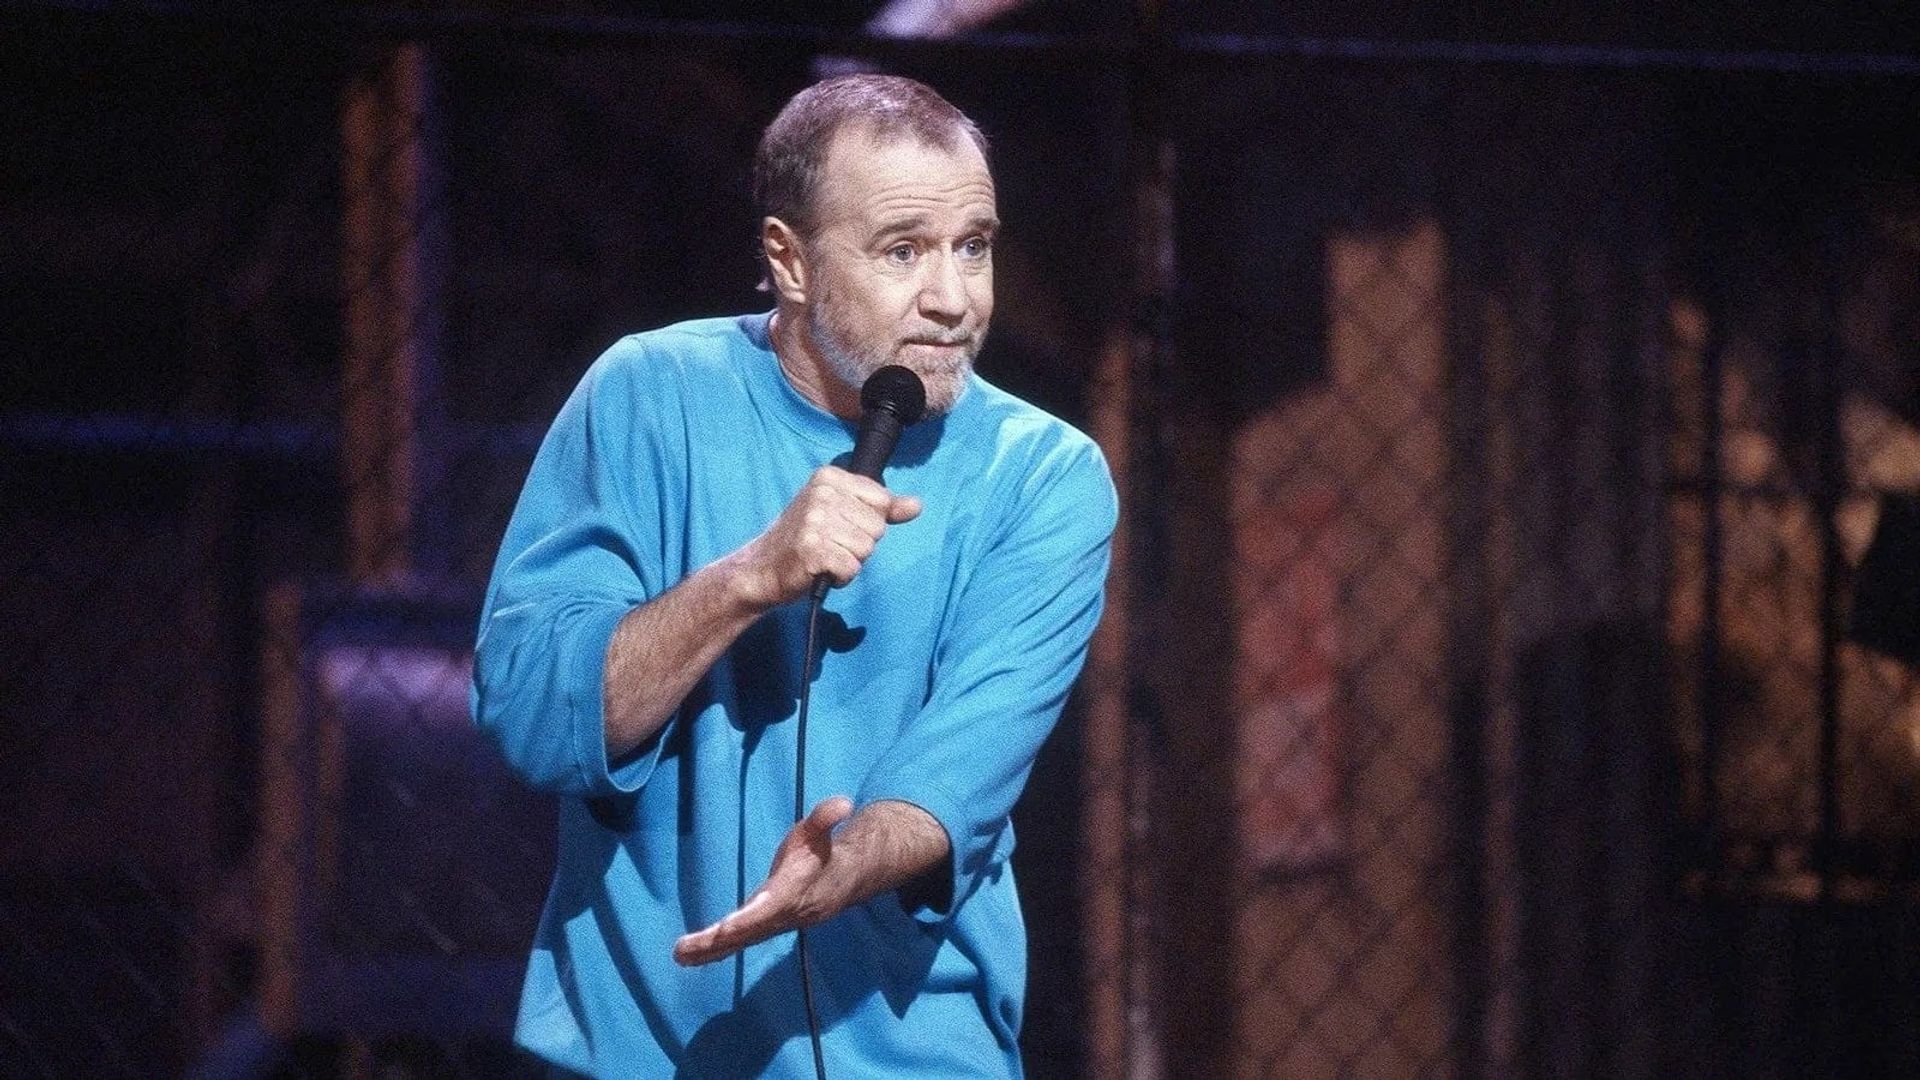 George Carlin: What Am I Doing in New Jersey? background